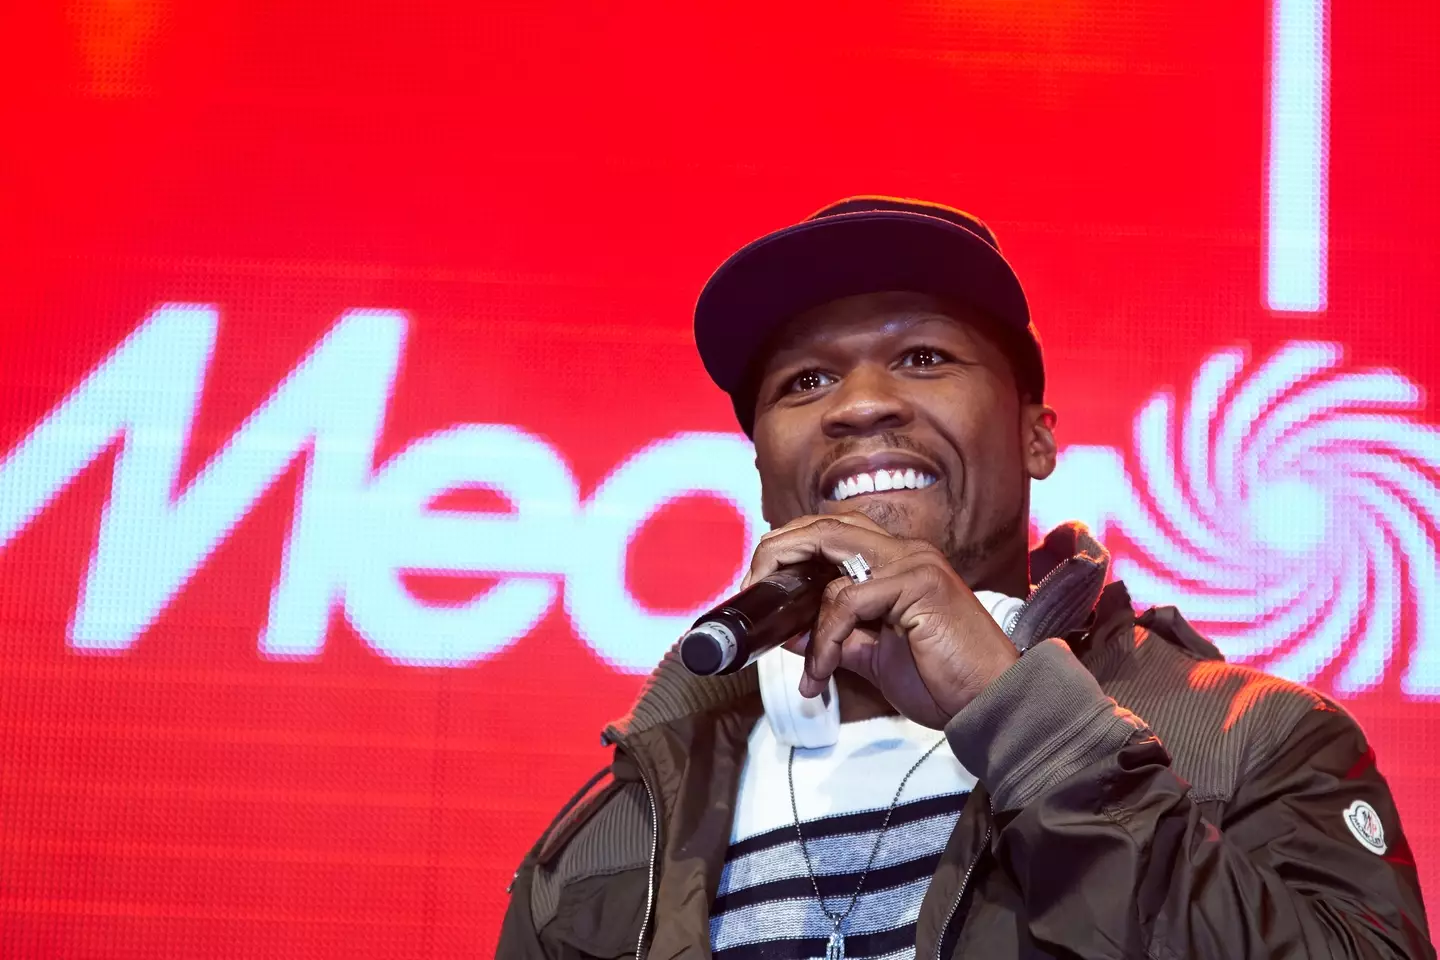 50 Cent has shared an estimation of how much money he's spent on legal fees since 2003.